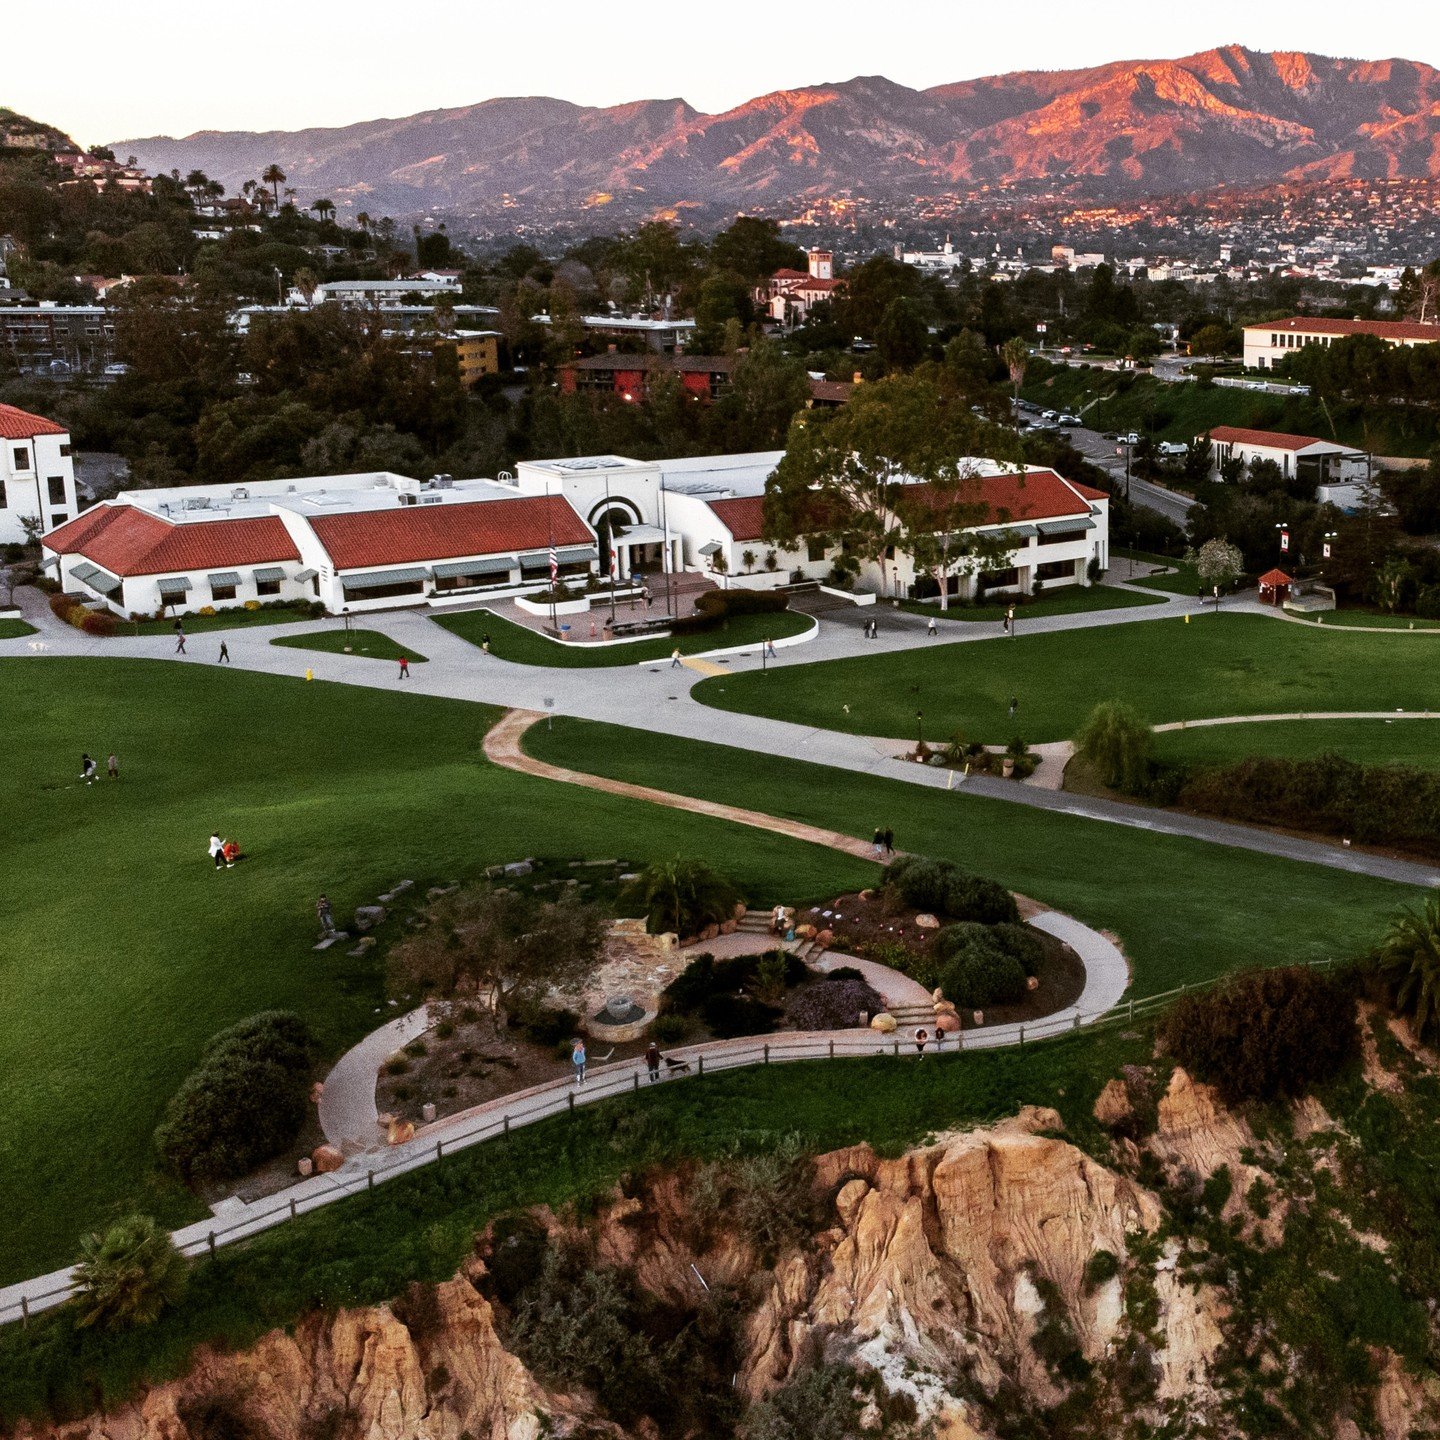 www.santabarbarawedding.com | Santa Barbara City College | View of the College Campus from Above